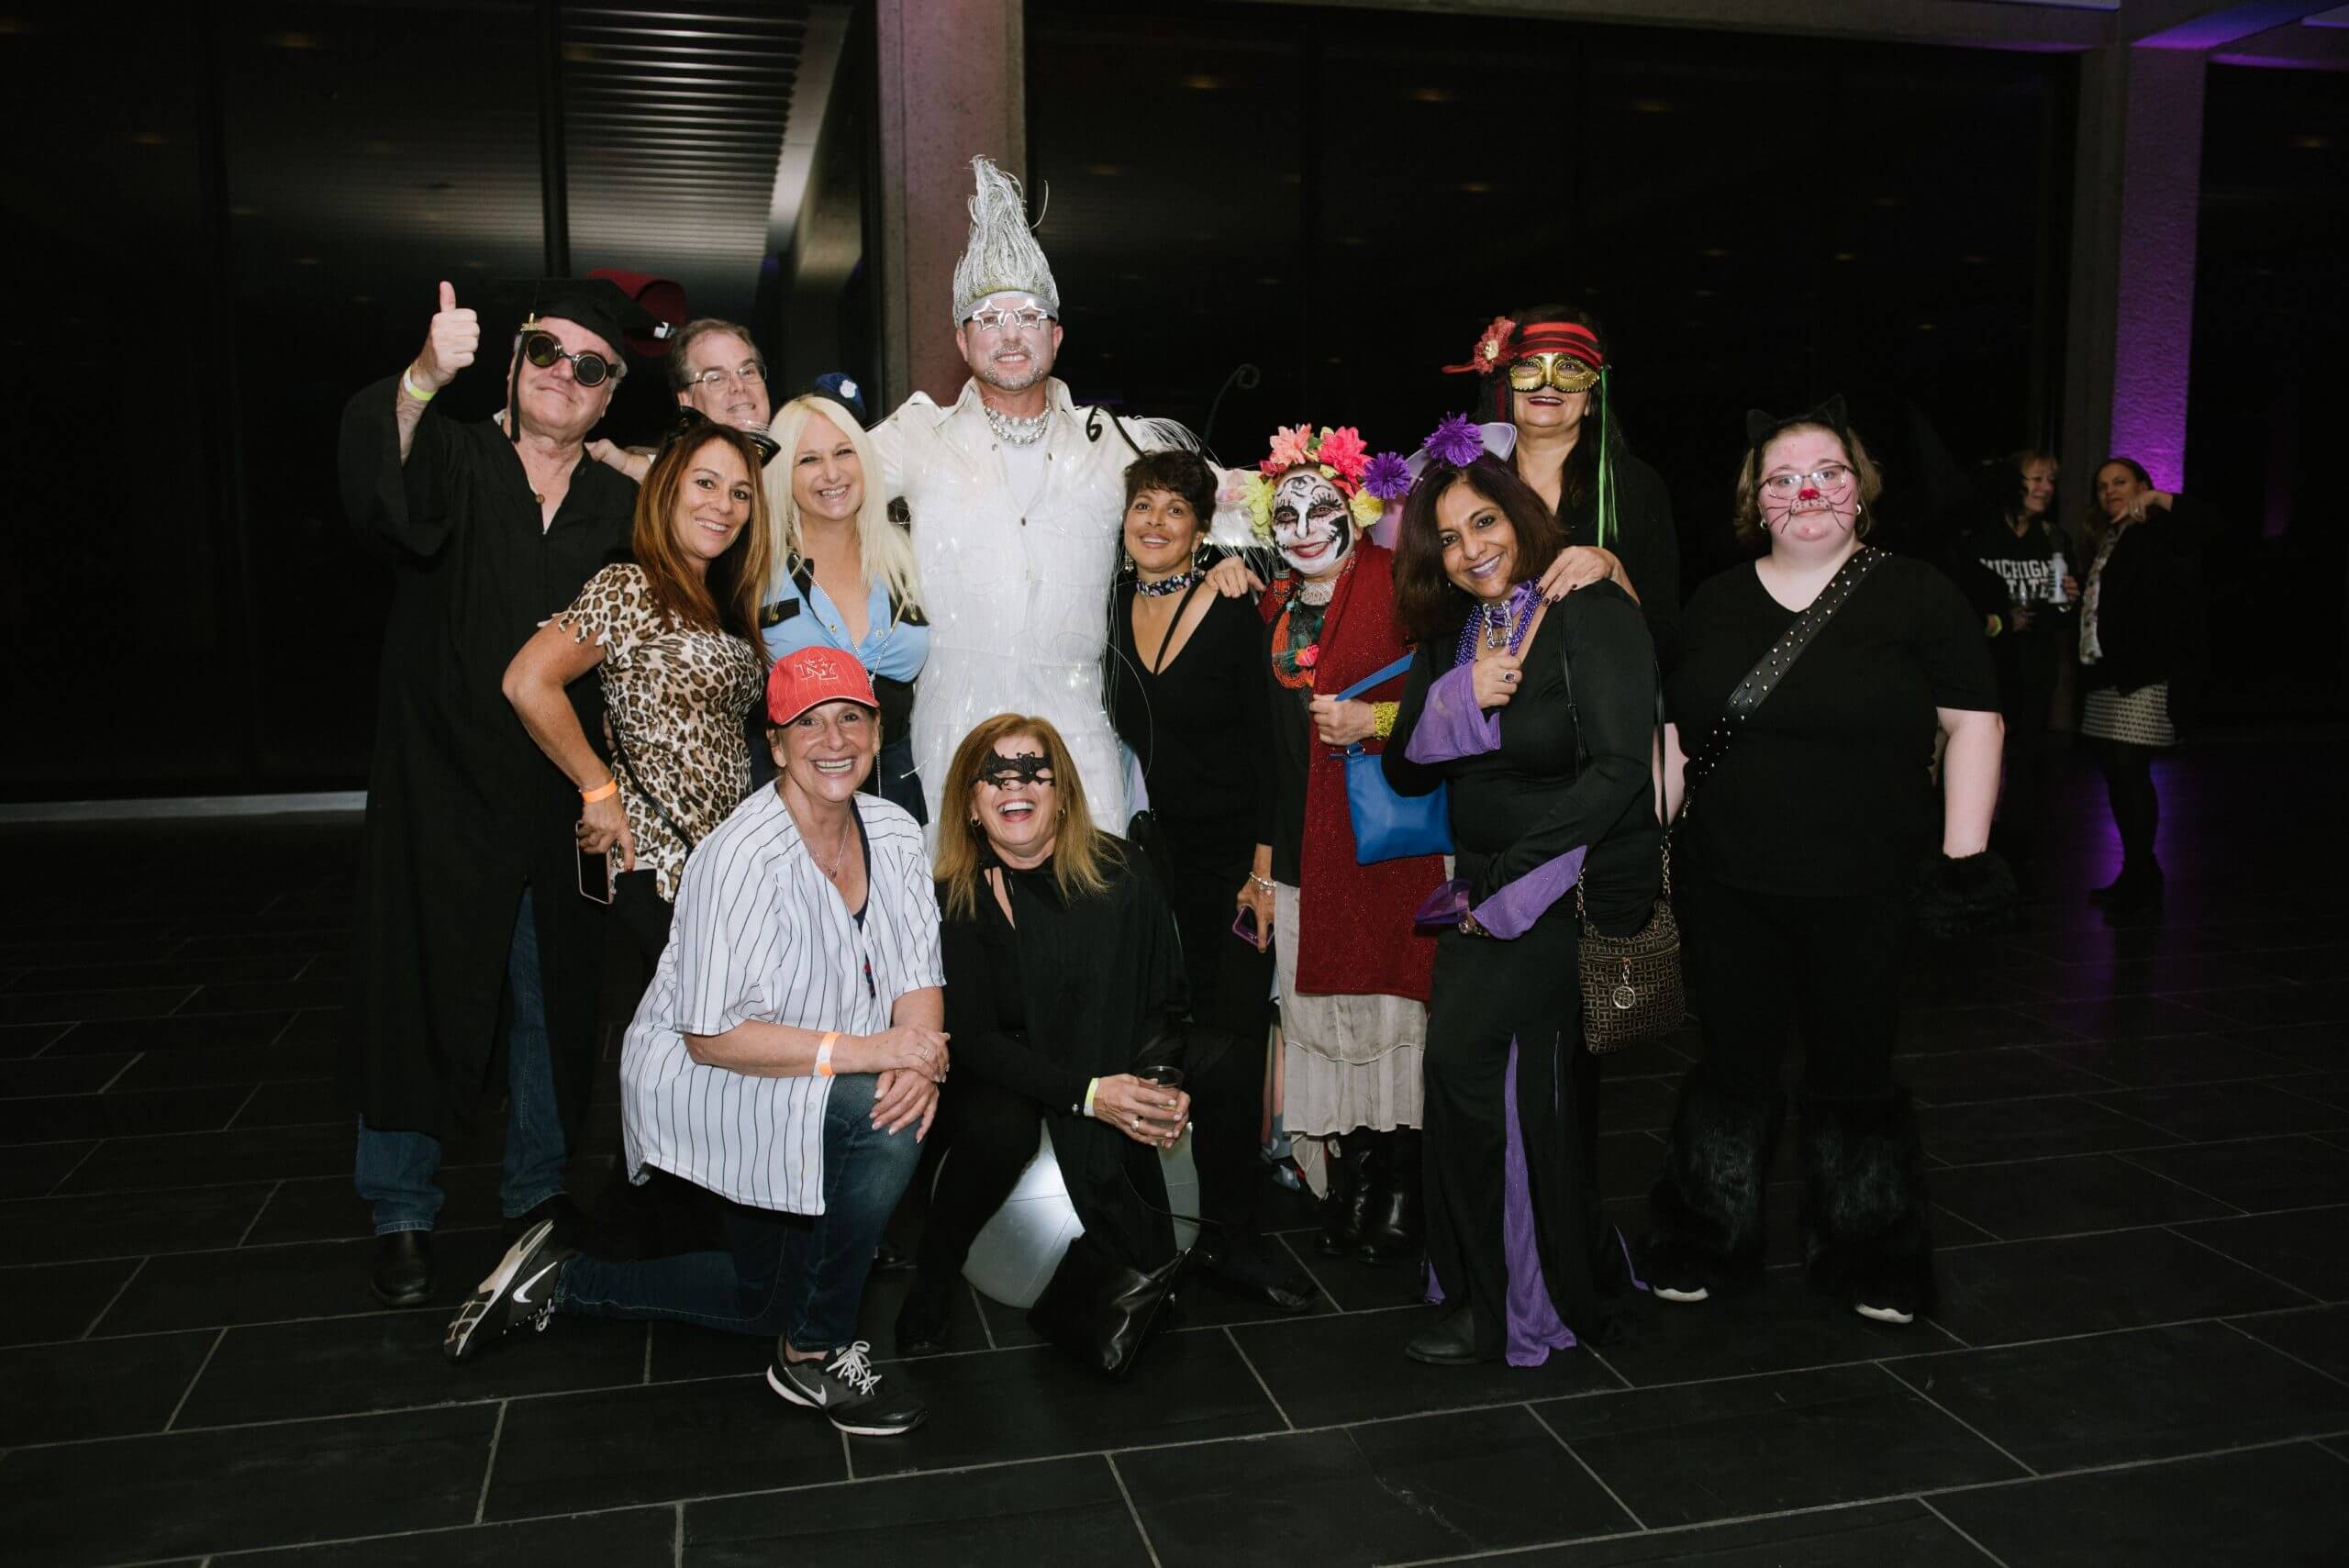 ‘Out Of This World’ Halloween Party Events at Bell Works